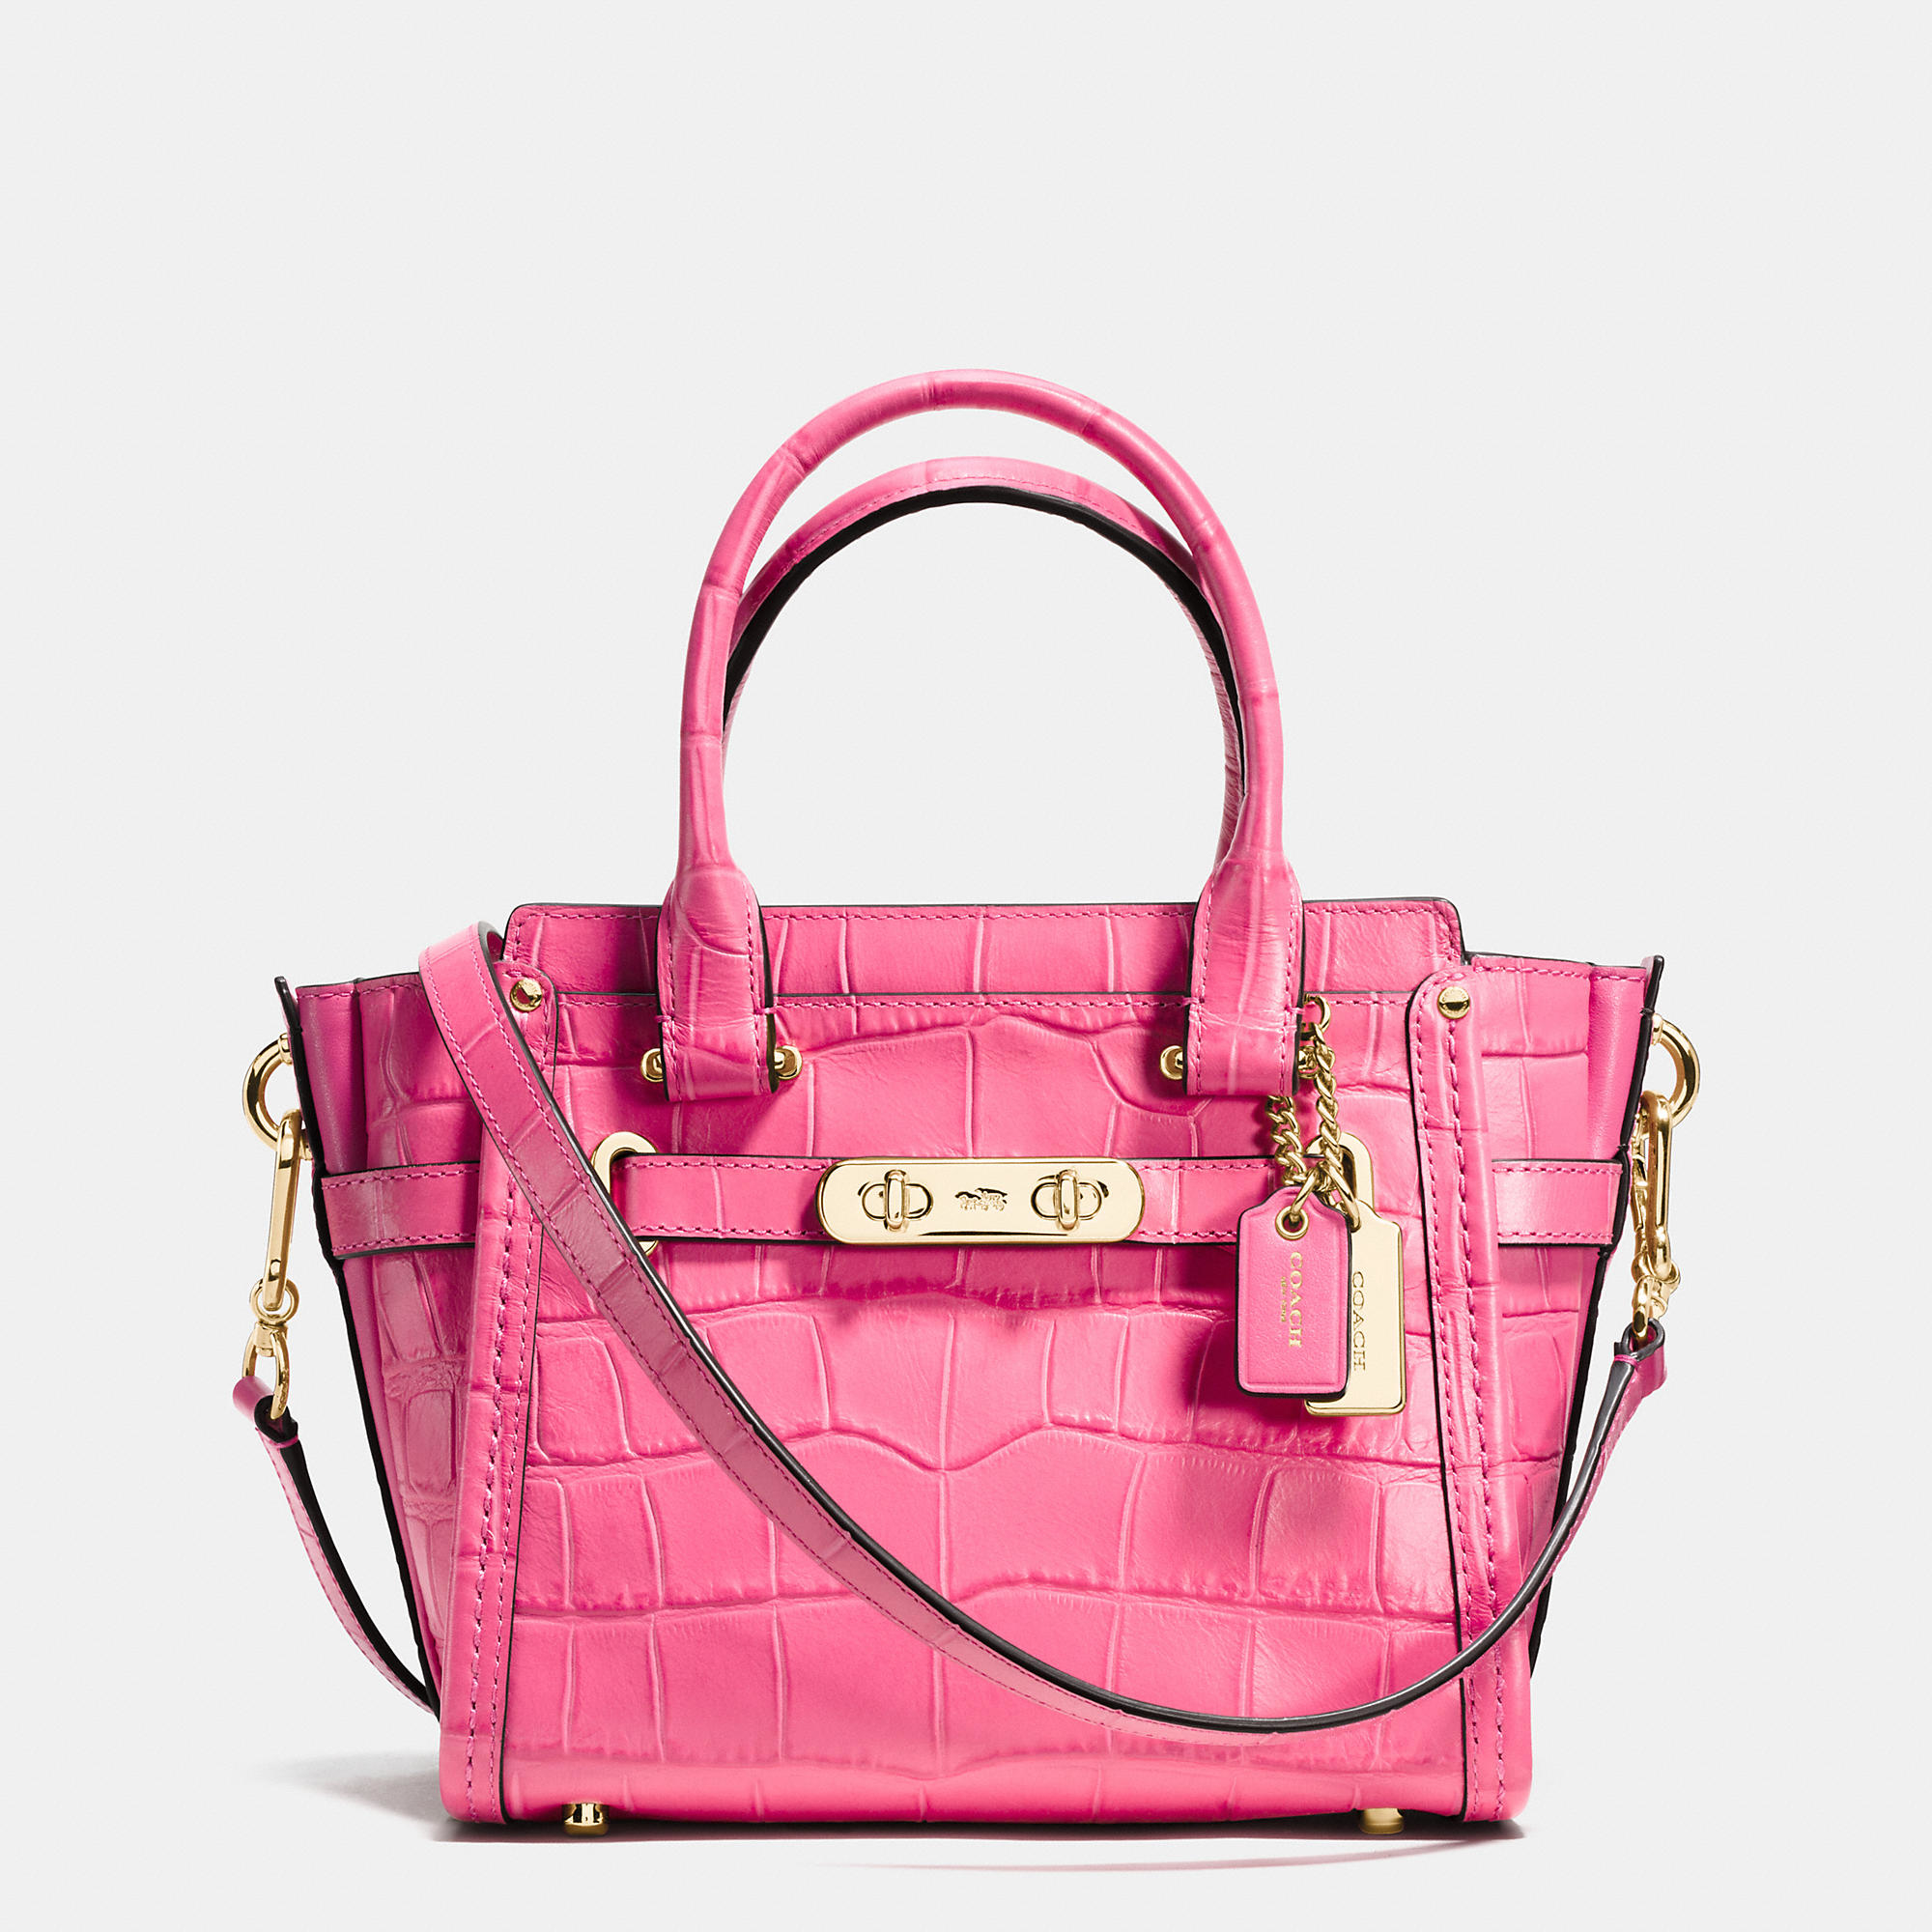 Signature sufflette leather handbag Coach Pink in Leather - 34259335